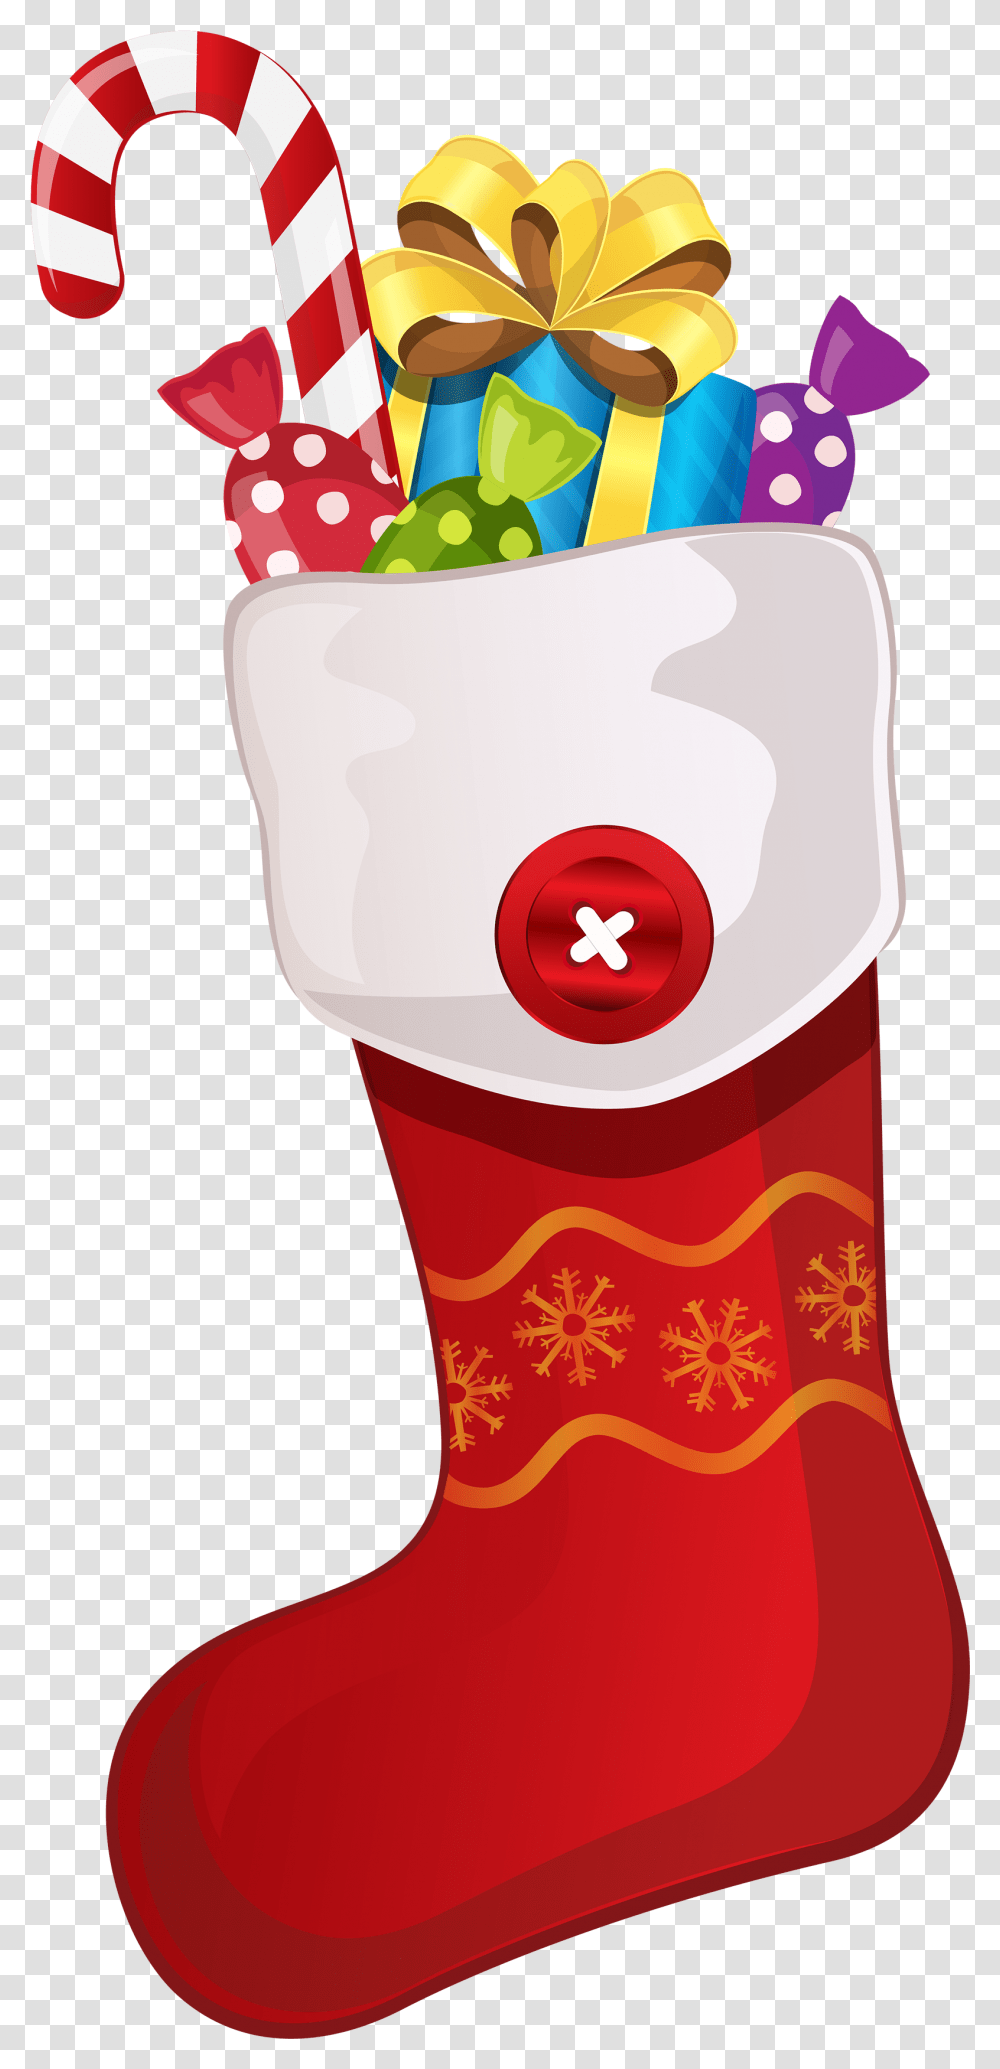 Christmas Stocking Stockings With Gifts Clipart Transparent Png